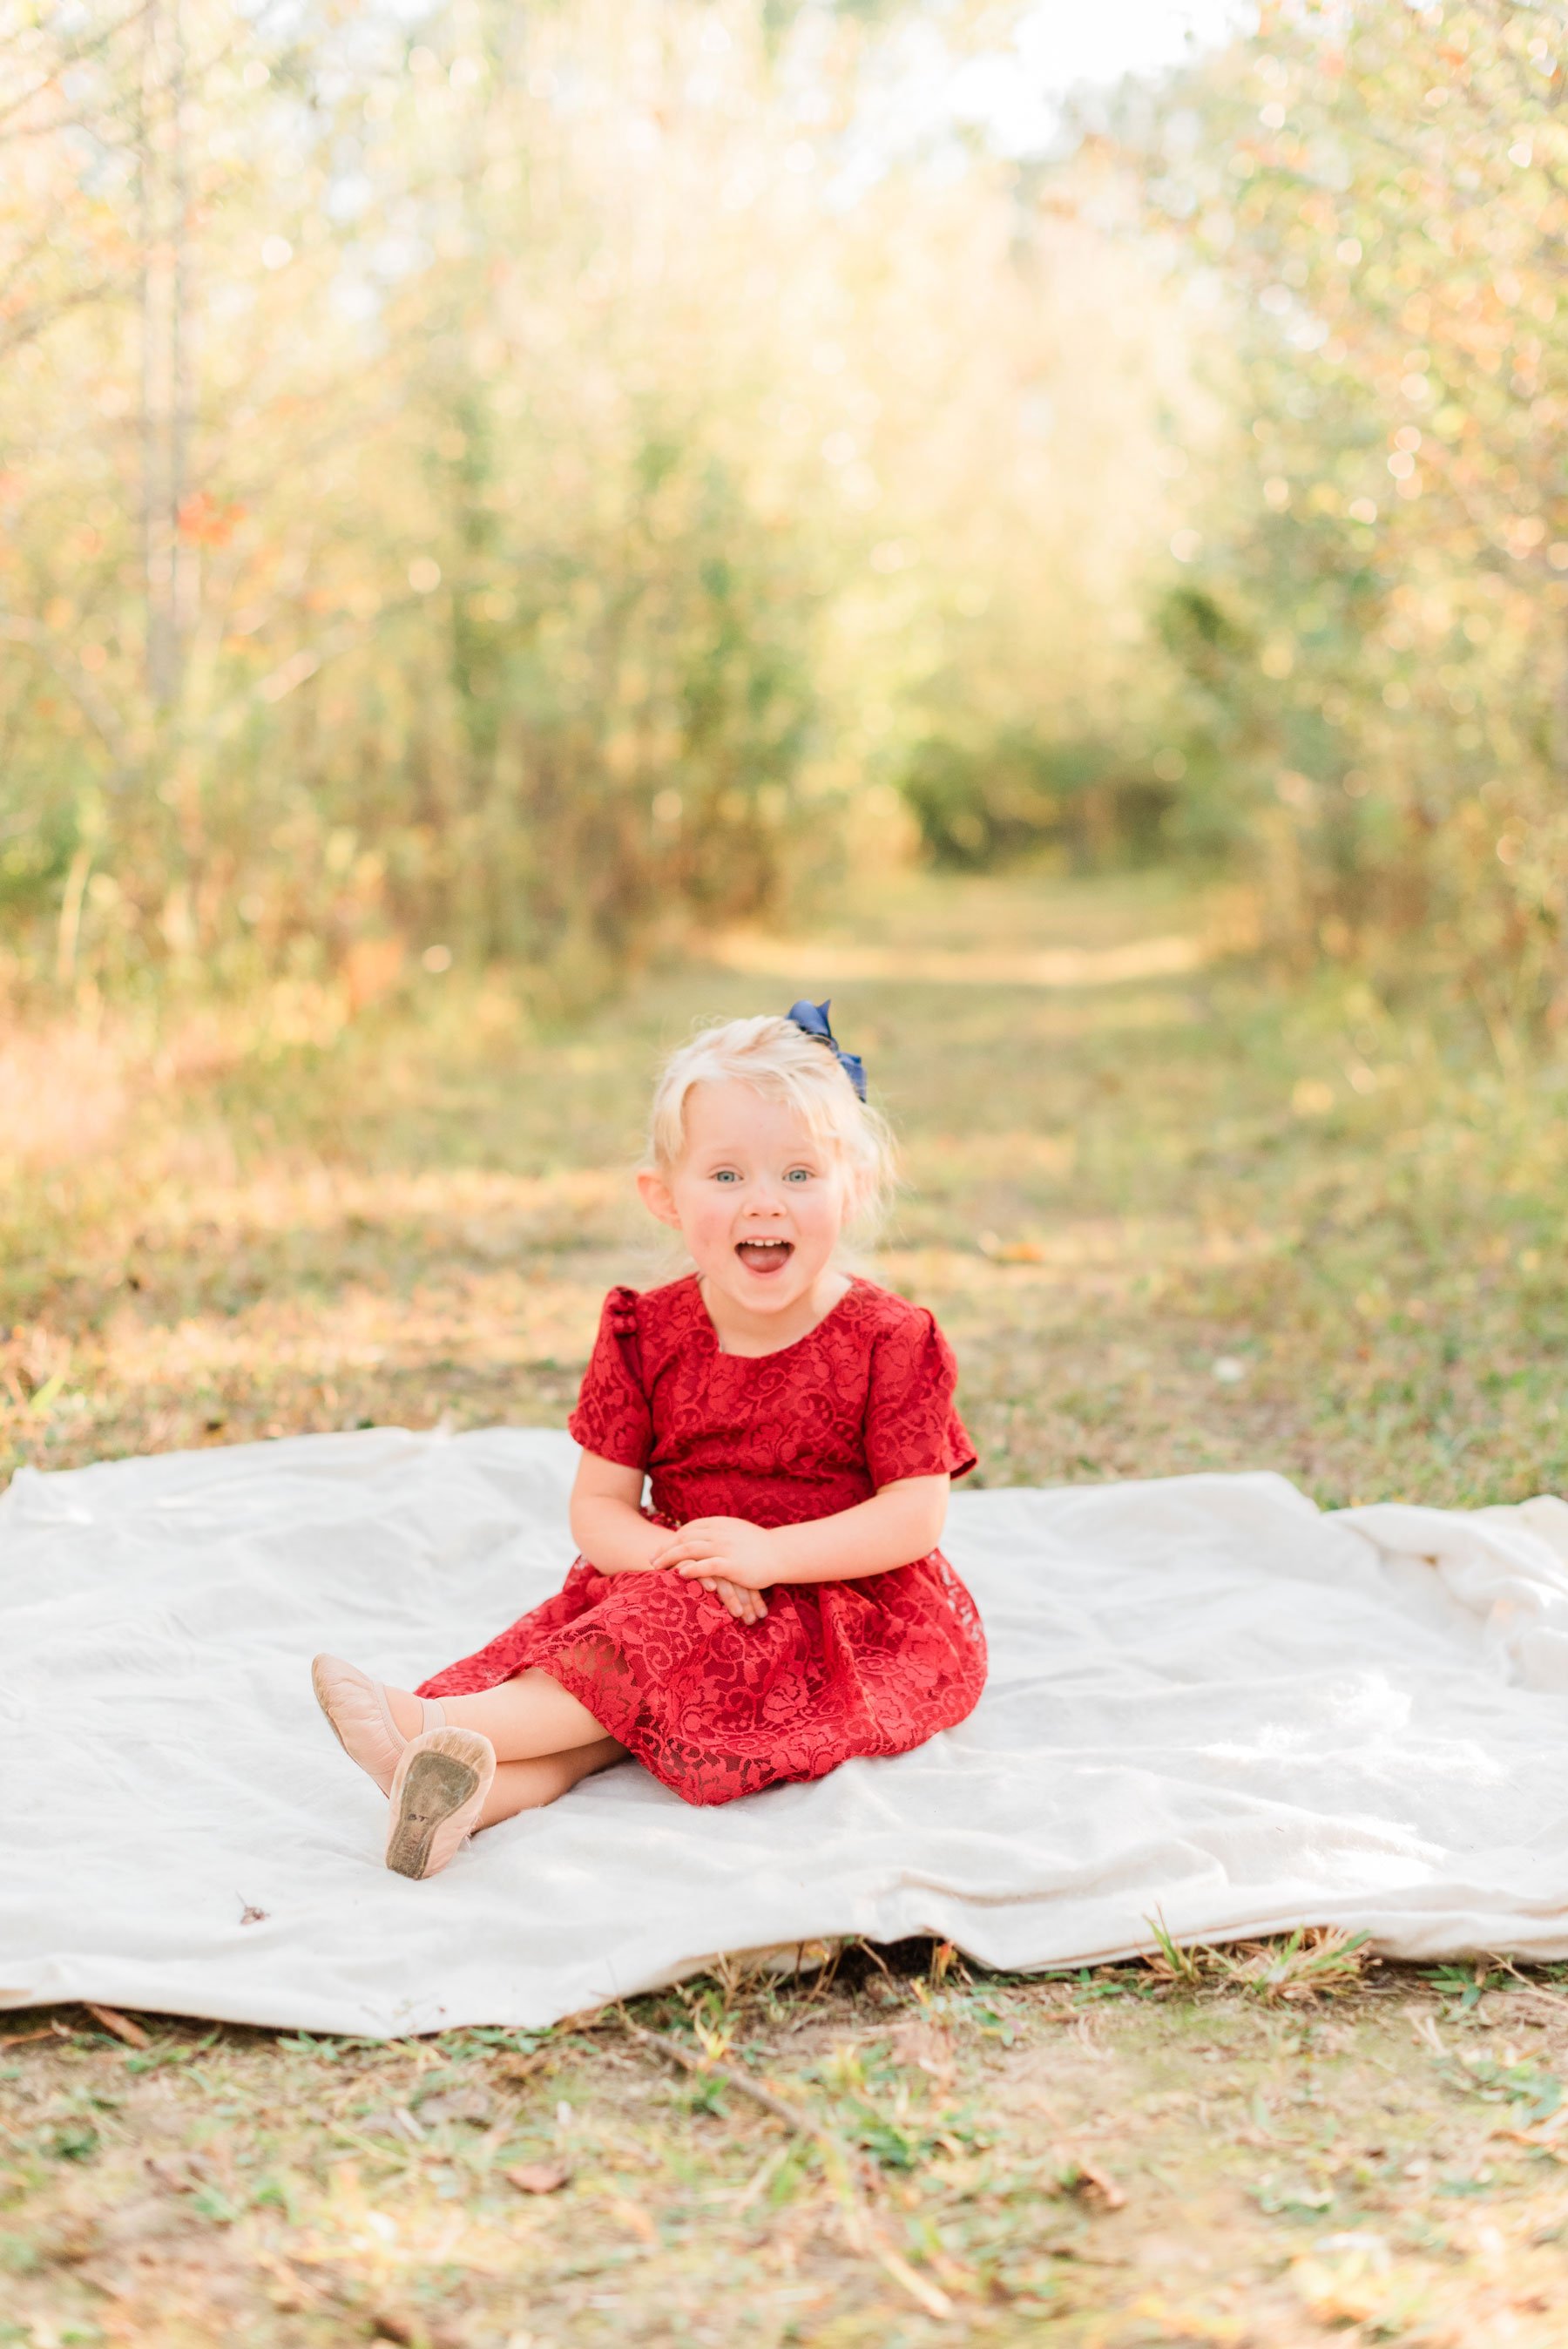  When you’re a young parent, it’s easy to get consumed with the hard and not see the beauty in the everyday moments. Professional photos, especially ones taken by Jacquie Erickson Photography, allow you to do just that.  #JacquieEricksonPhotography #